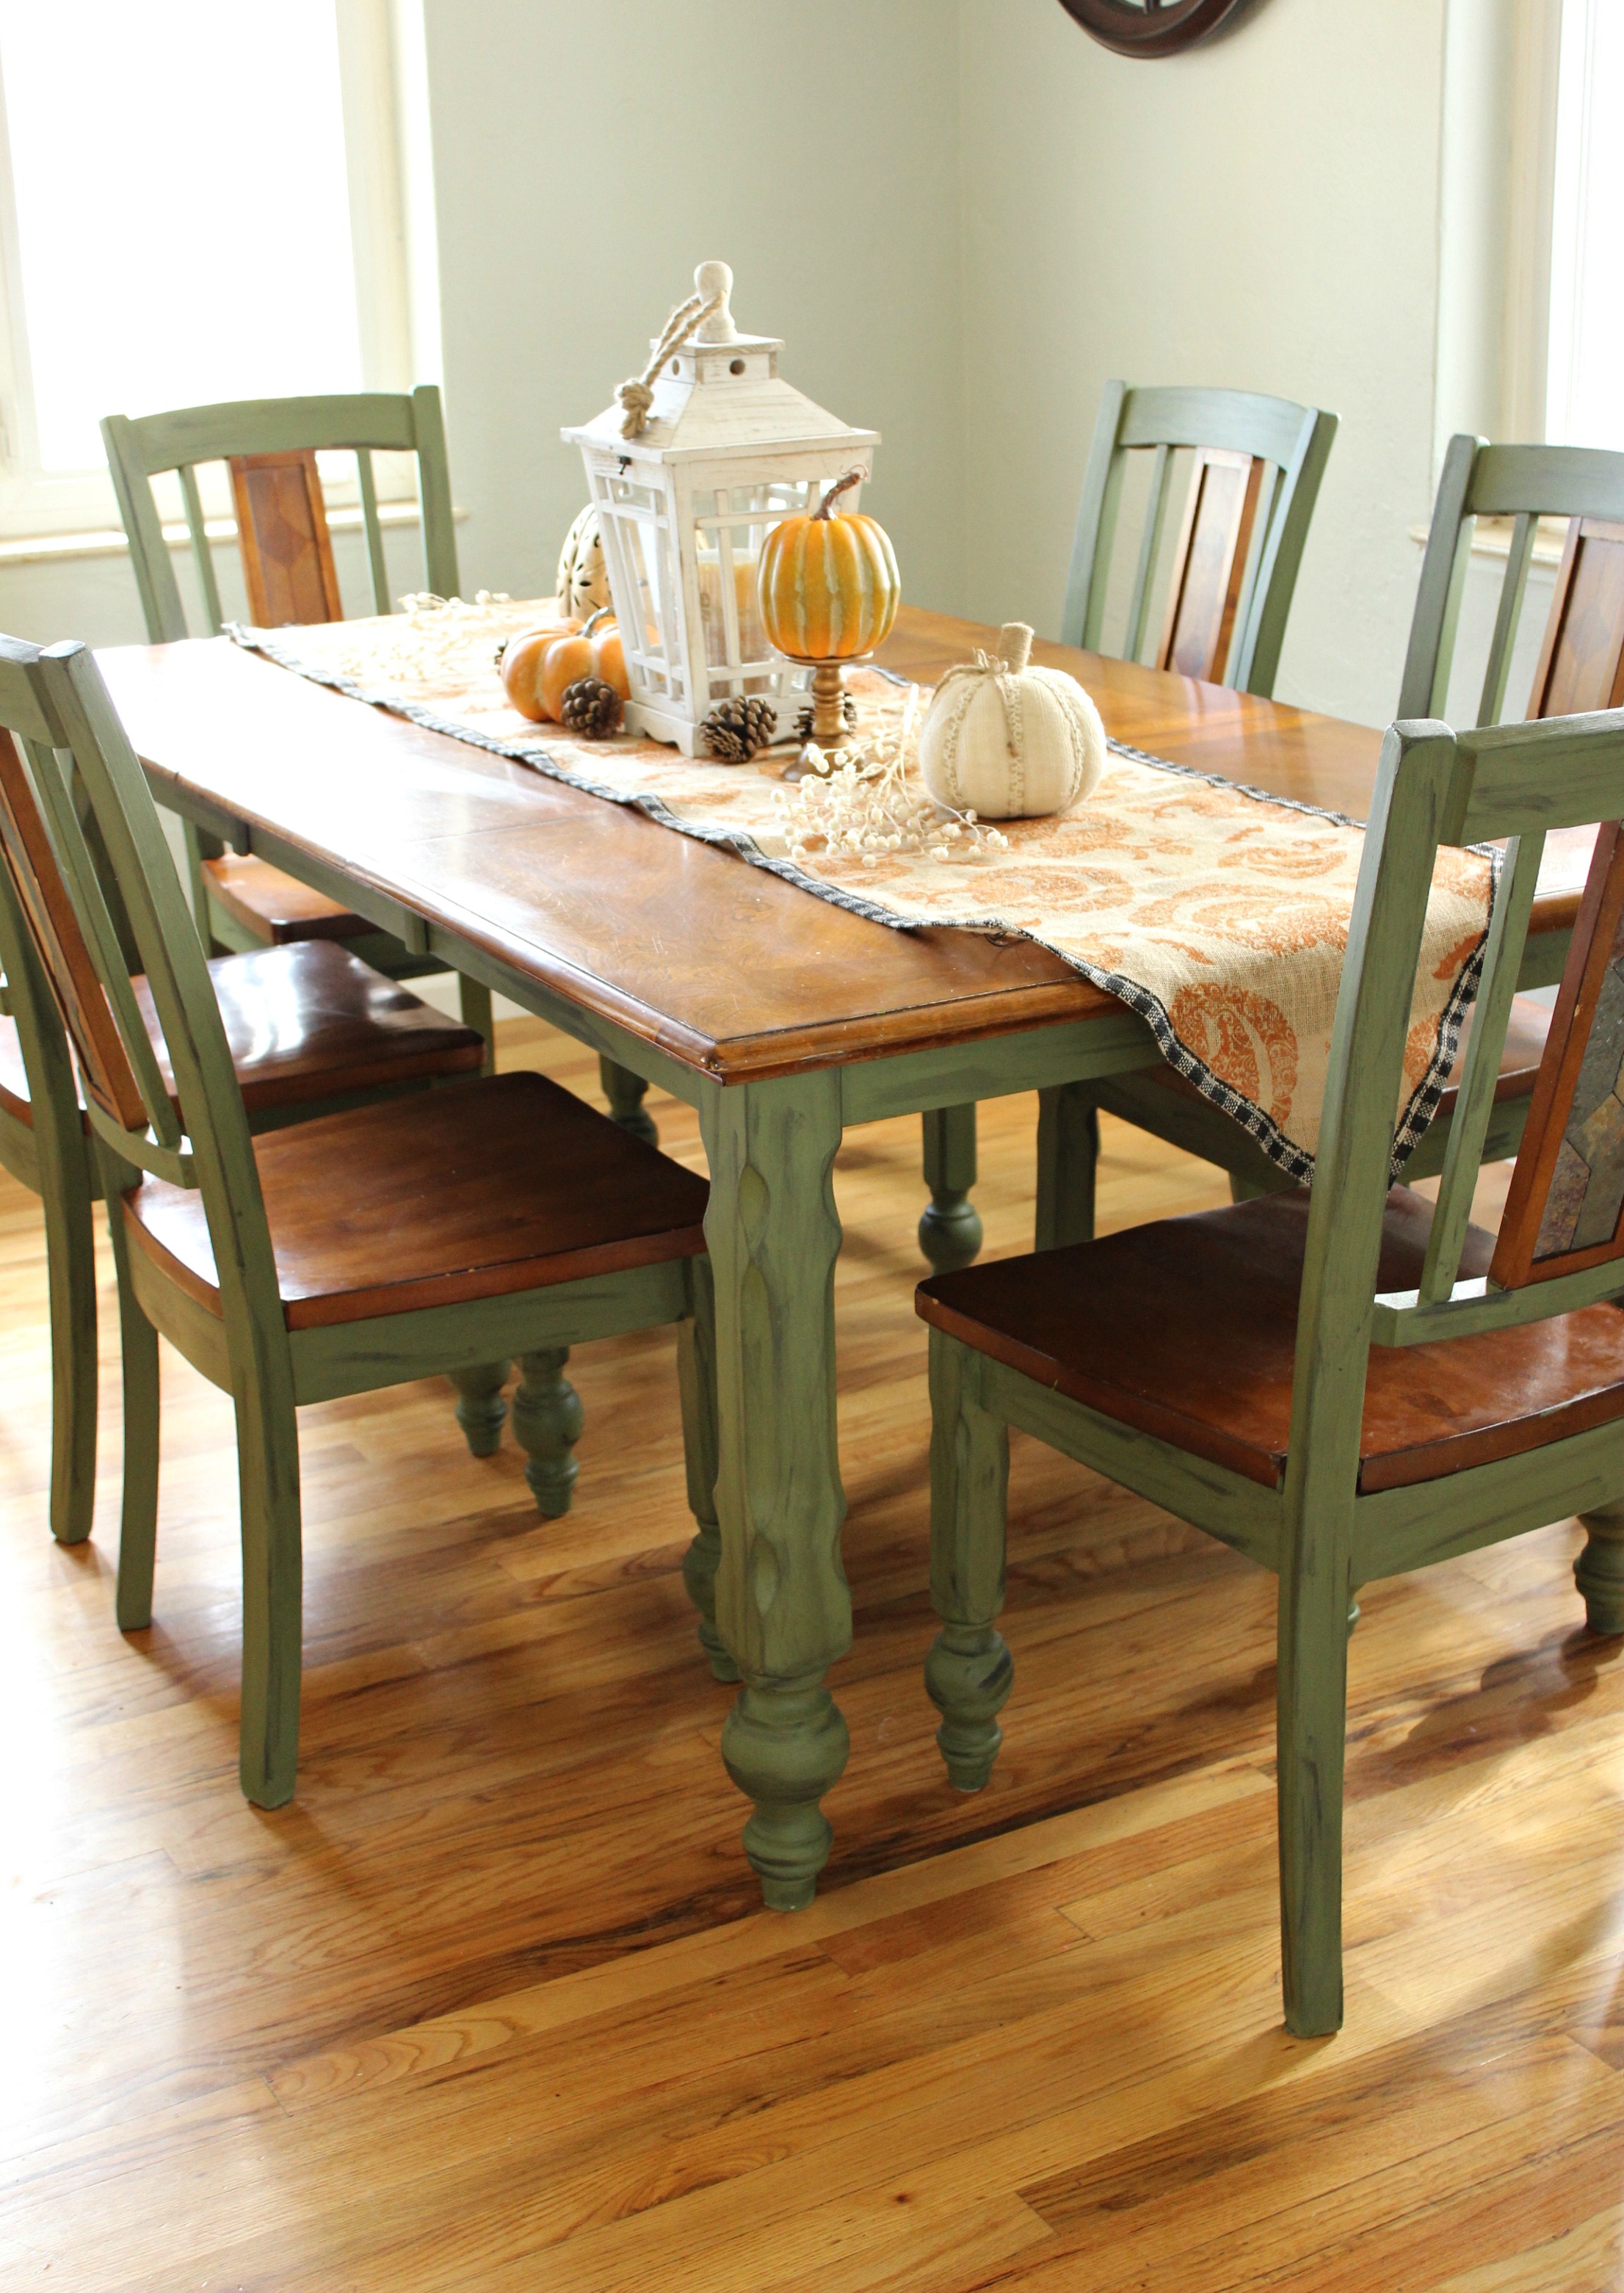 How to Update a Table with Chalk Paint - I Dig Pinterest